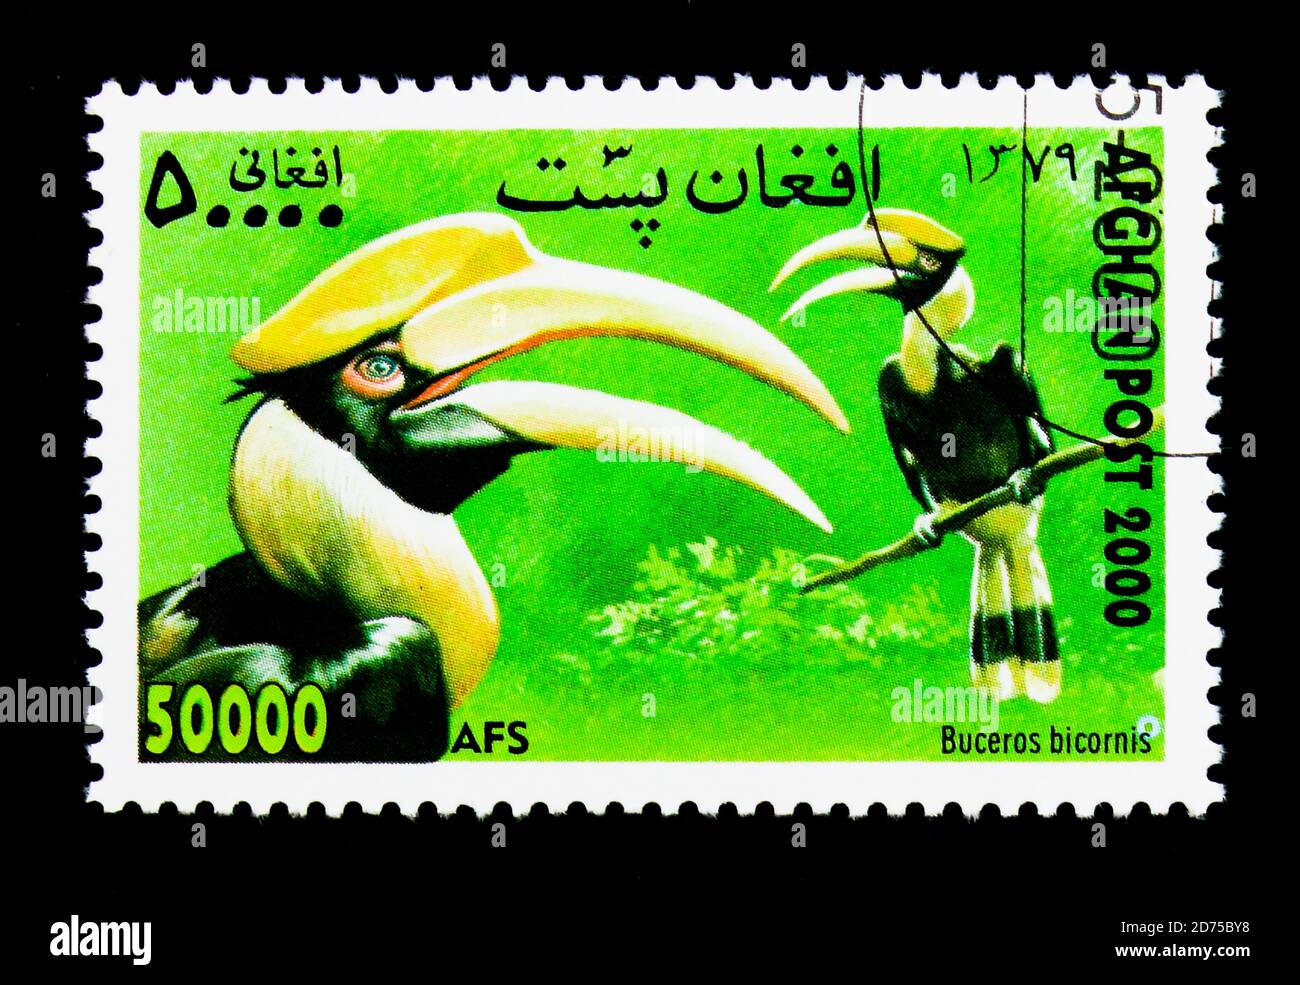 MOSCOW, RUSSIA - NOVEMBER 25, 2017: A stamp printed in Afghanistan shows Great Hornbill (Buceros bicornis), International Stamp Exhibition WIPA '00, V Stock Photo